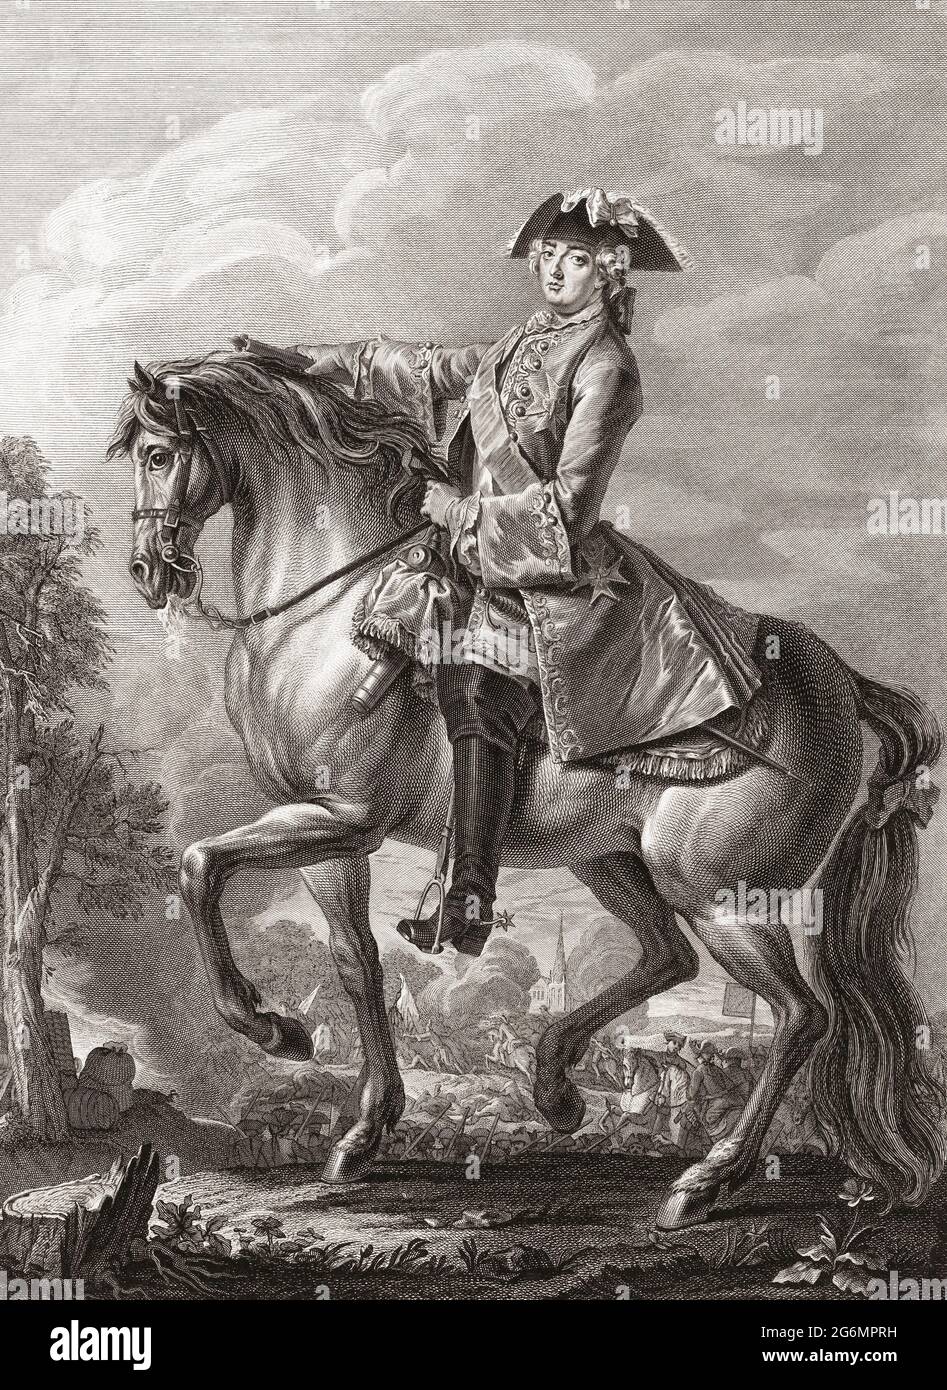 King Louis XV of France, 1710 - 1774. Known as Louis the Beloved, he acceded to the French throne at the age of 5 and ruled until his death 59 years later at the age of 64.  After an engraving by Michel Aubert. Stock Photo